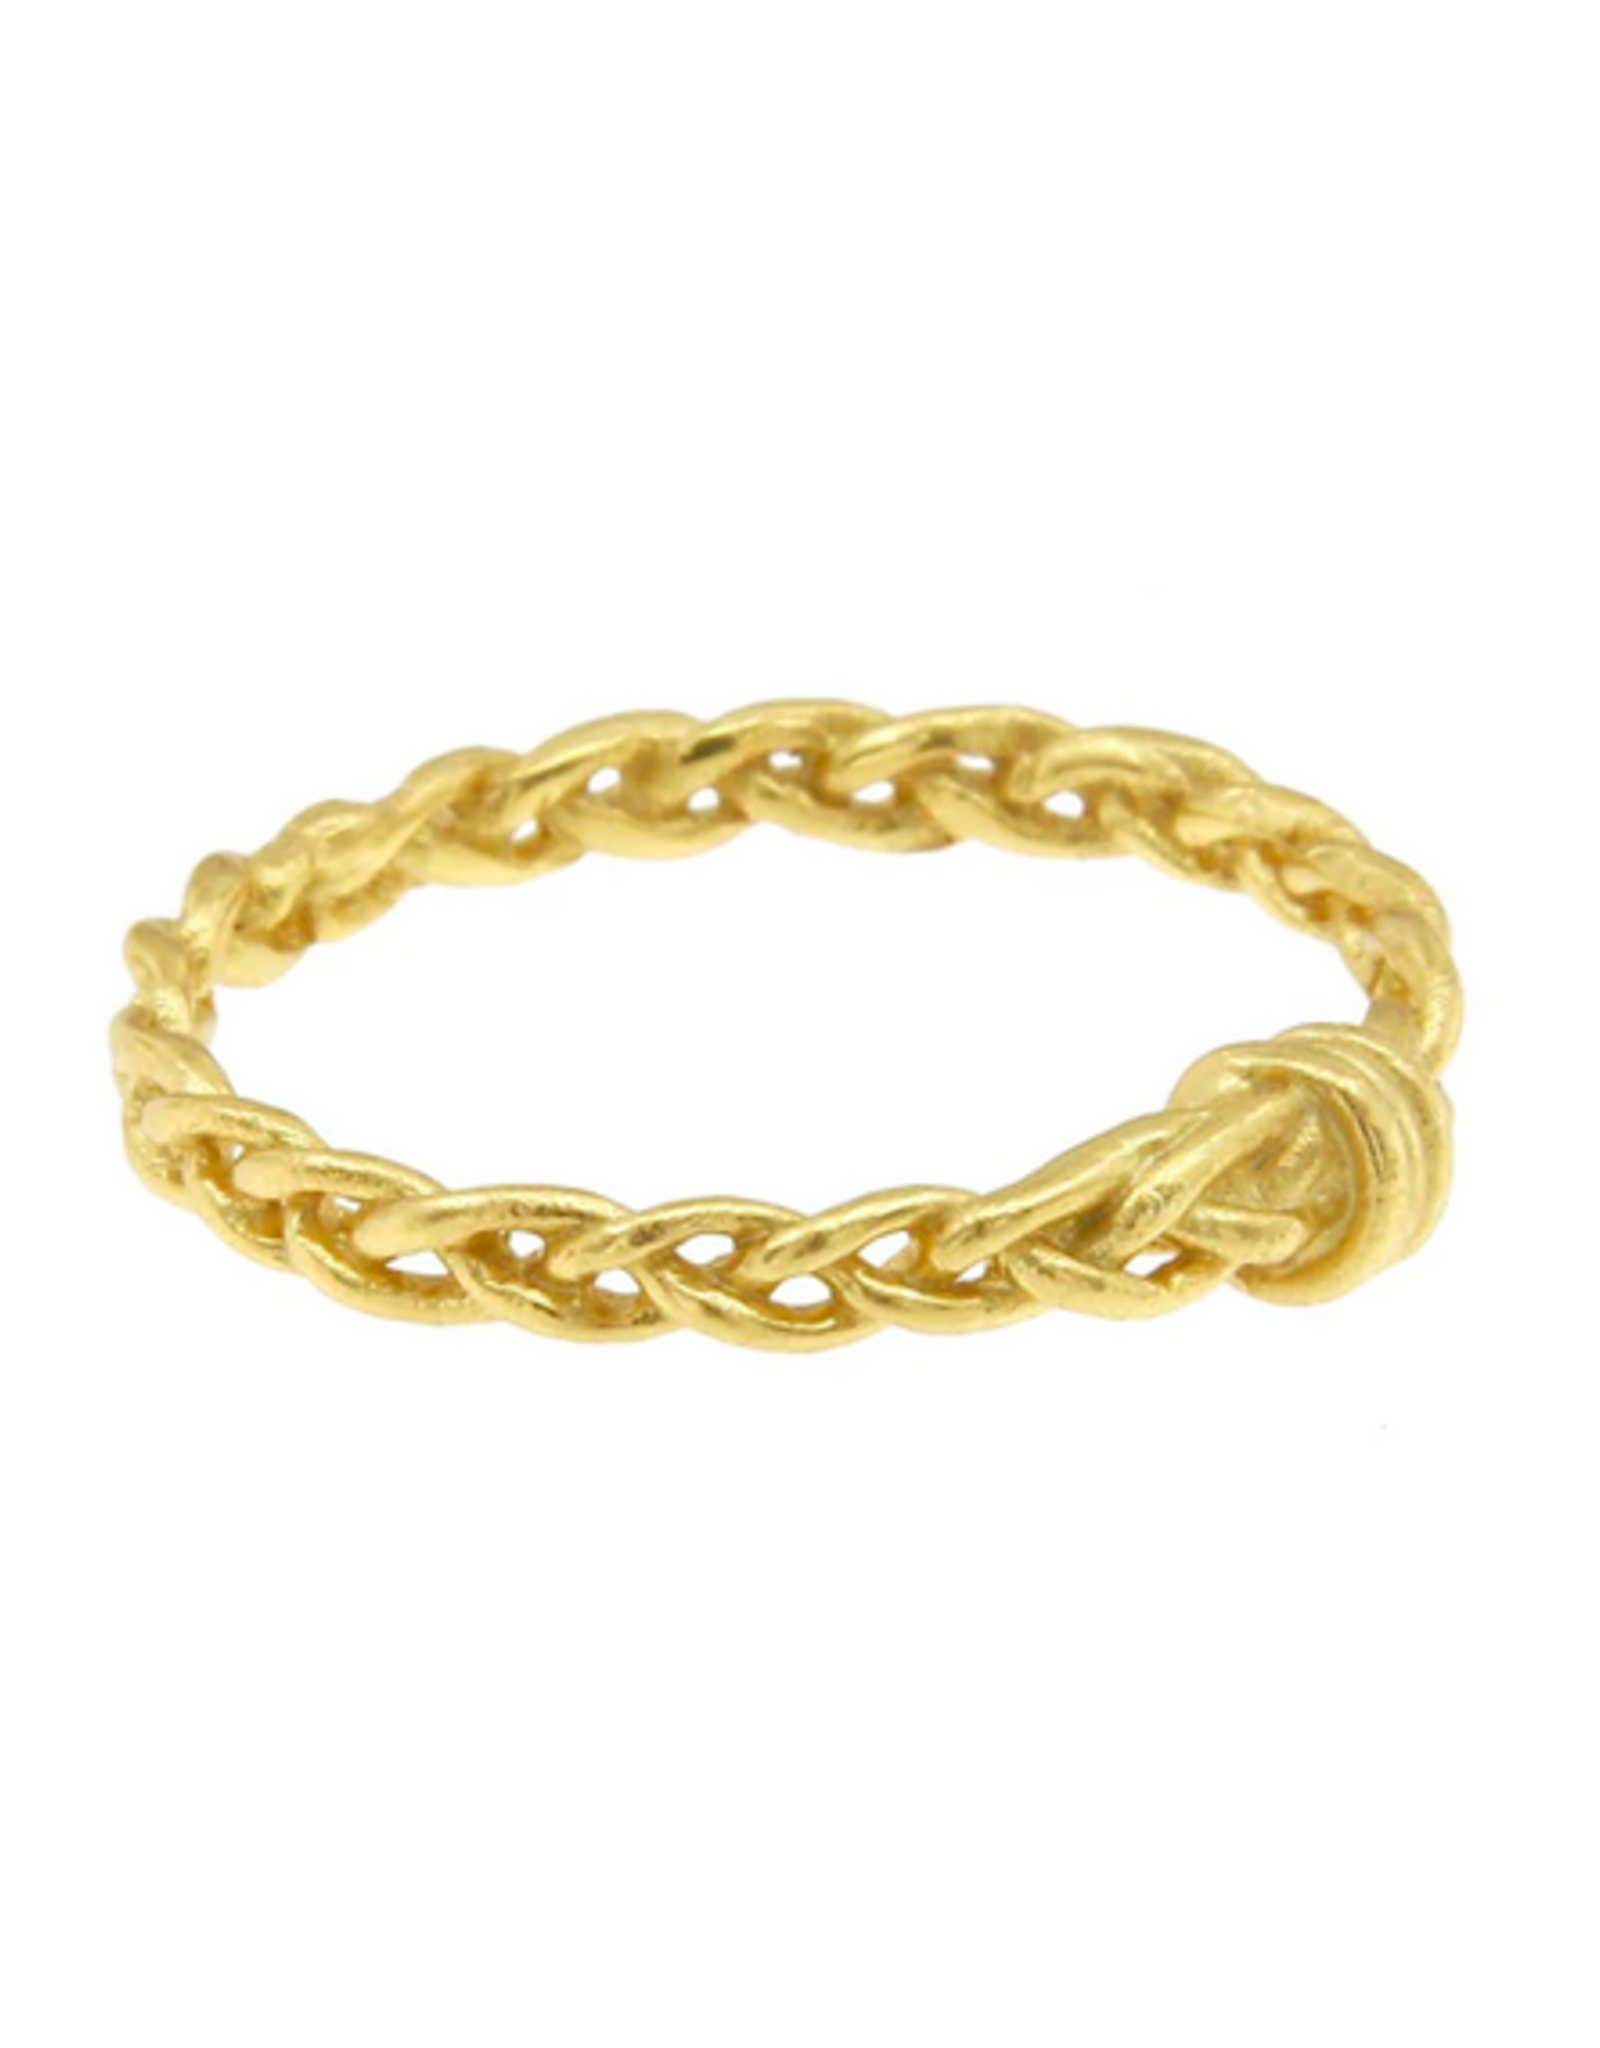 Cleopatra's Bling Eternity Love ring goldplated silver